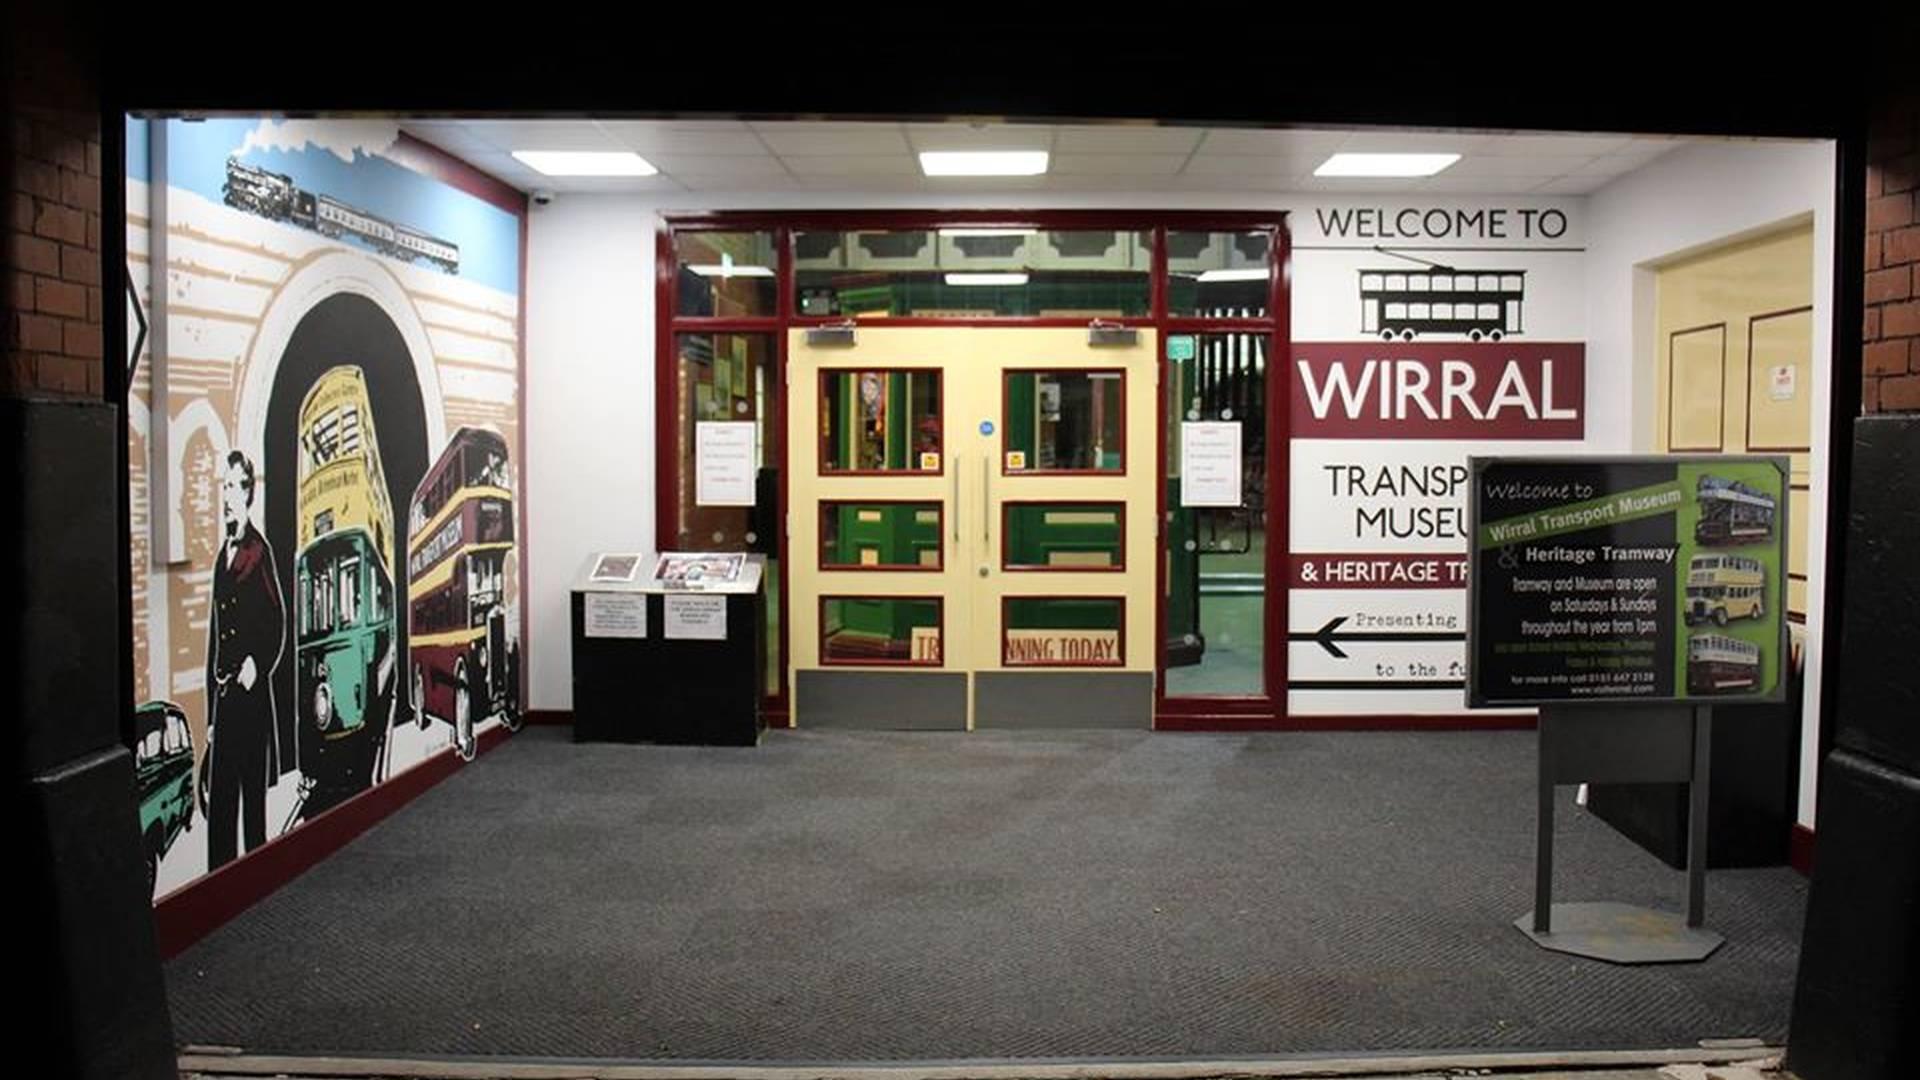 Wirral Transport Museum & Heritage Tramway photo